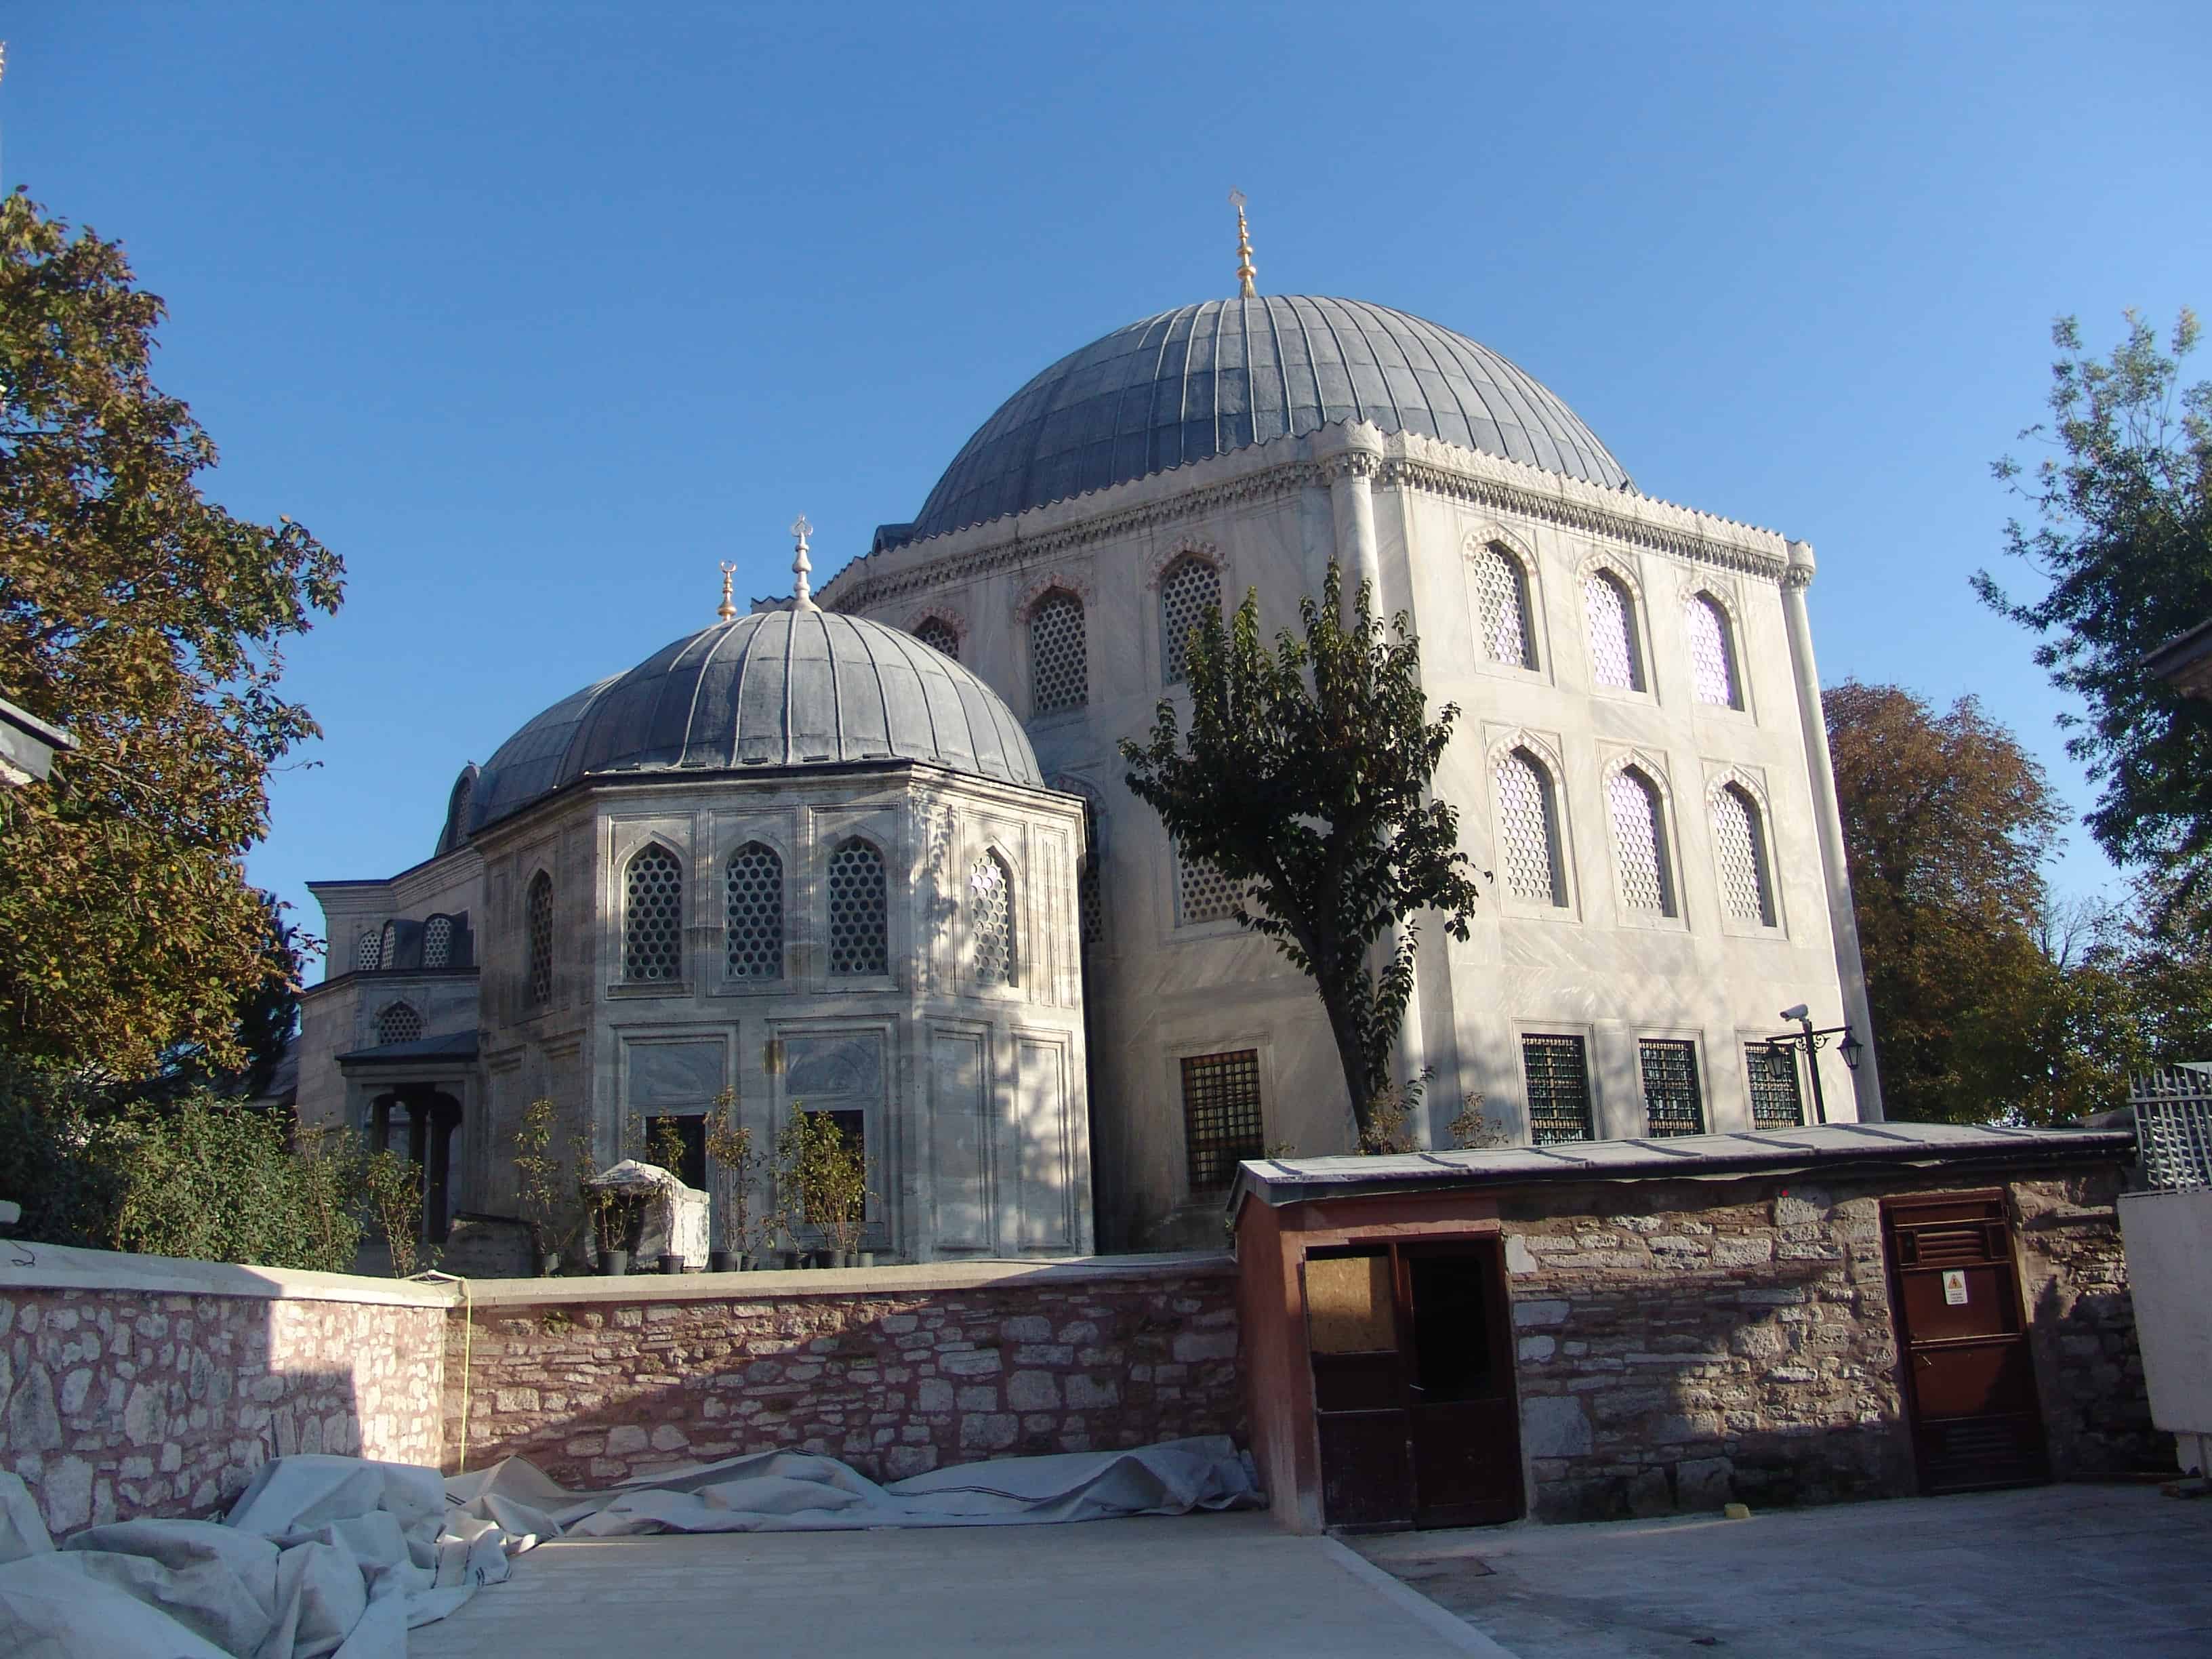 Tomb of Princes (left) and Tomb of Murad III (right) at Hagia Sophia in Istanbul, Turkey